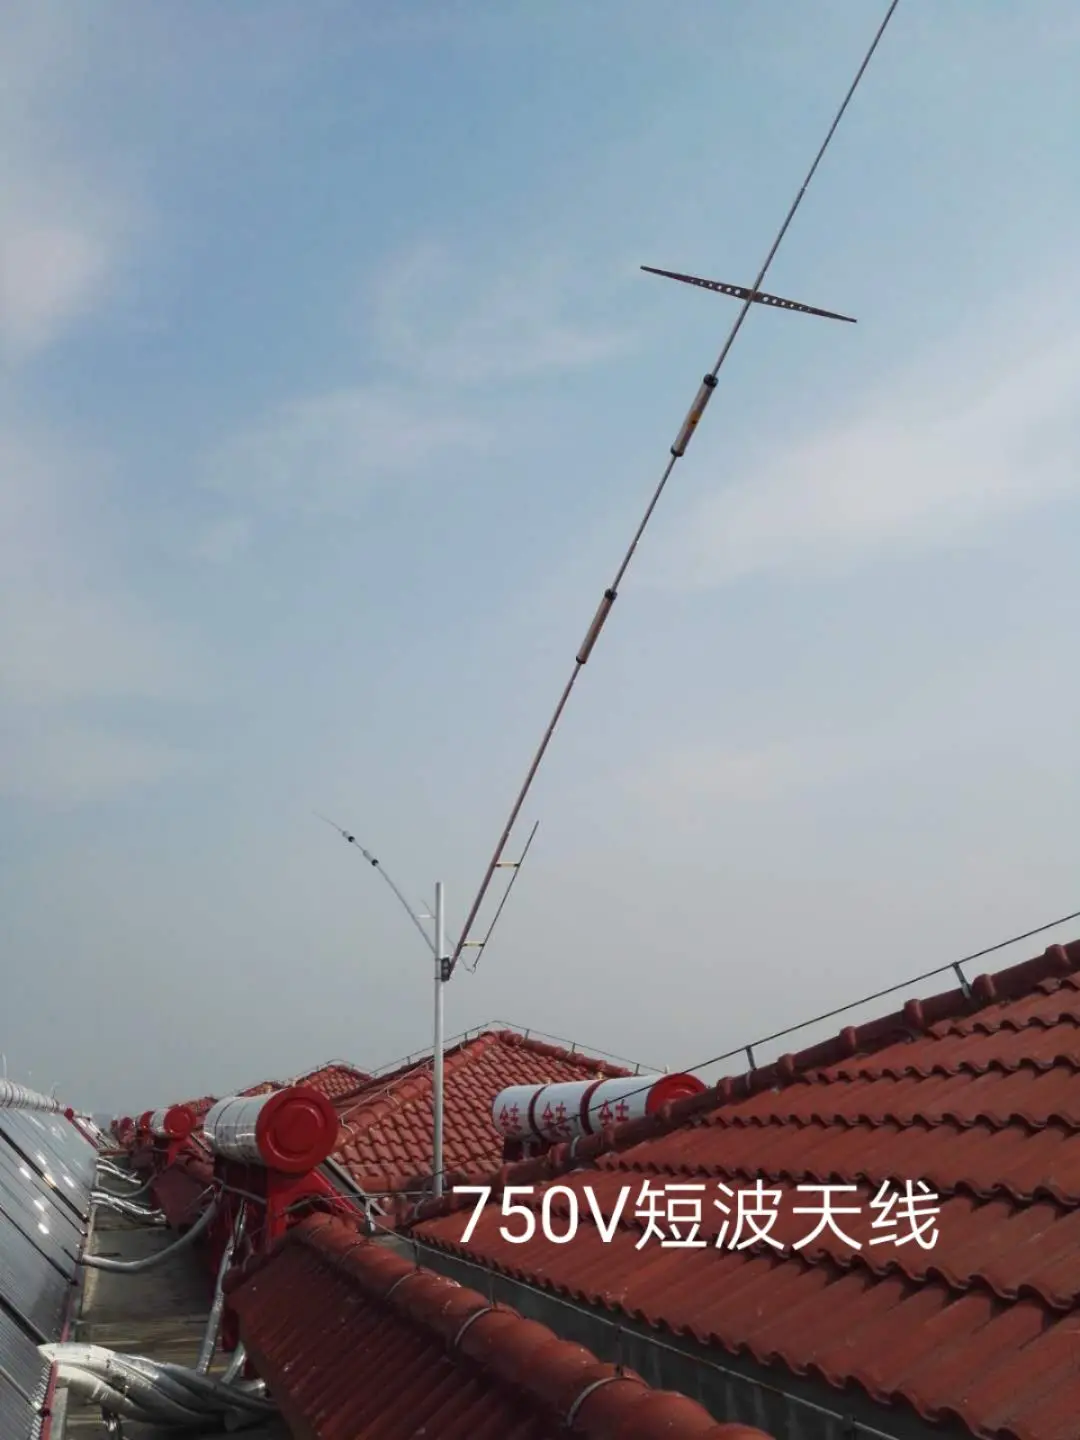 750V Positive V, 5-band Low-noise, High-efficiency Short-wave Antenna with Excellent Performance